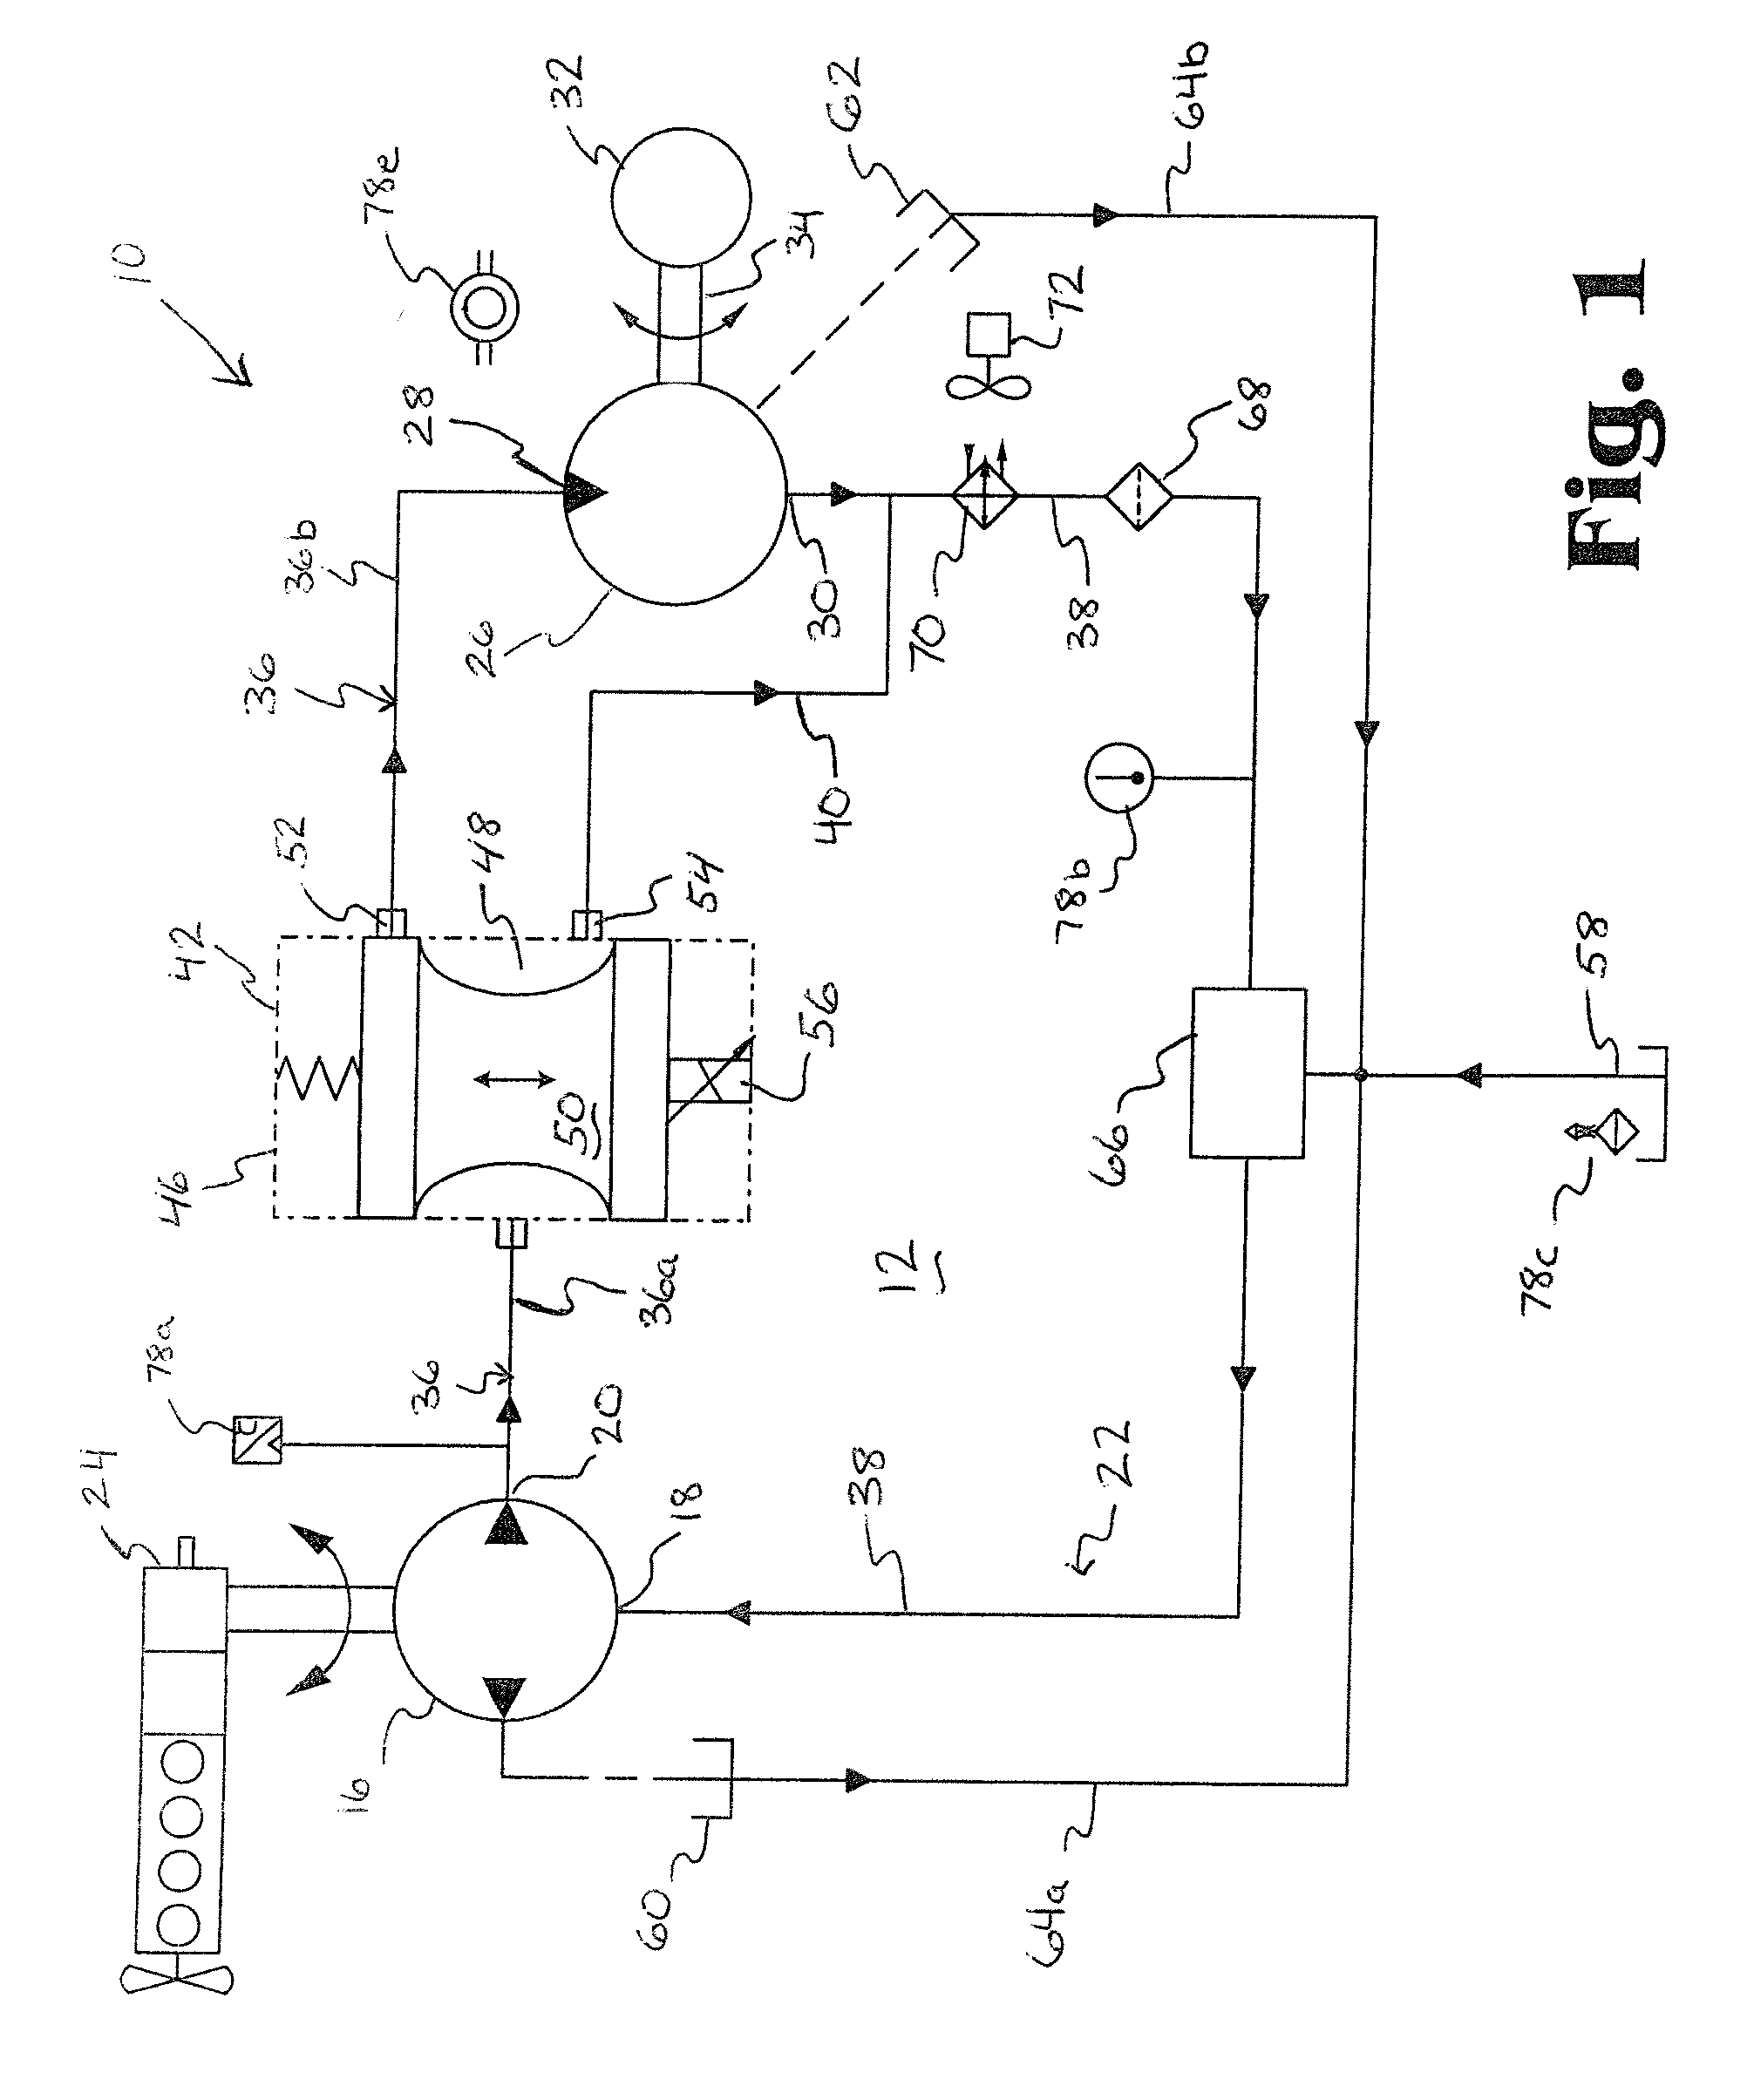 Electronic Control for a Hydraulically Driven Generator